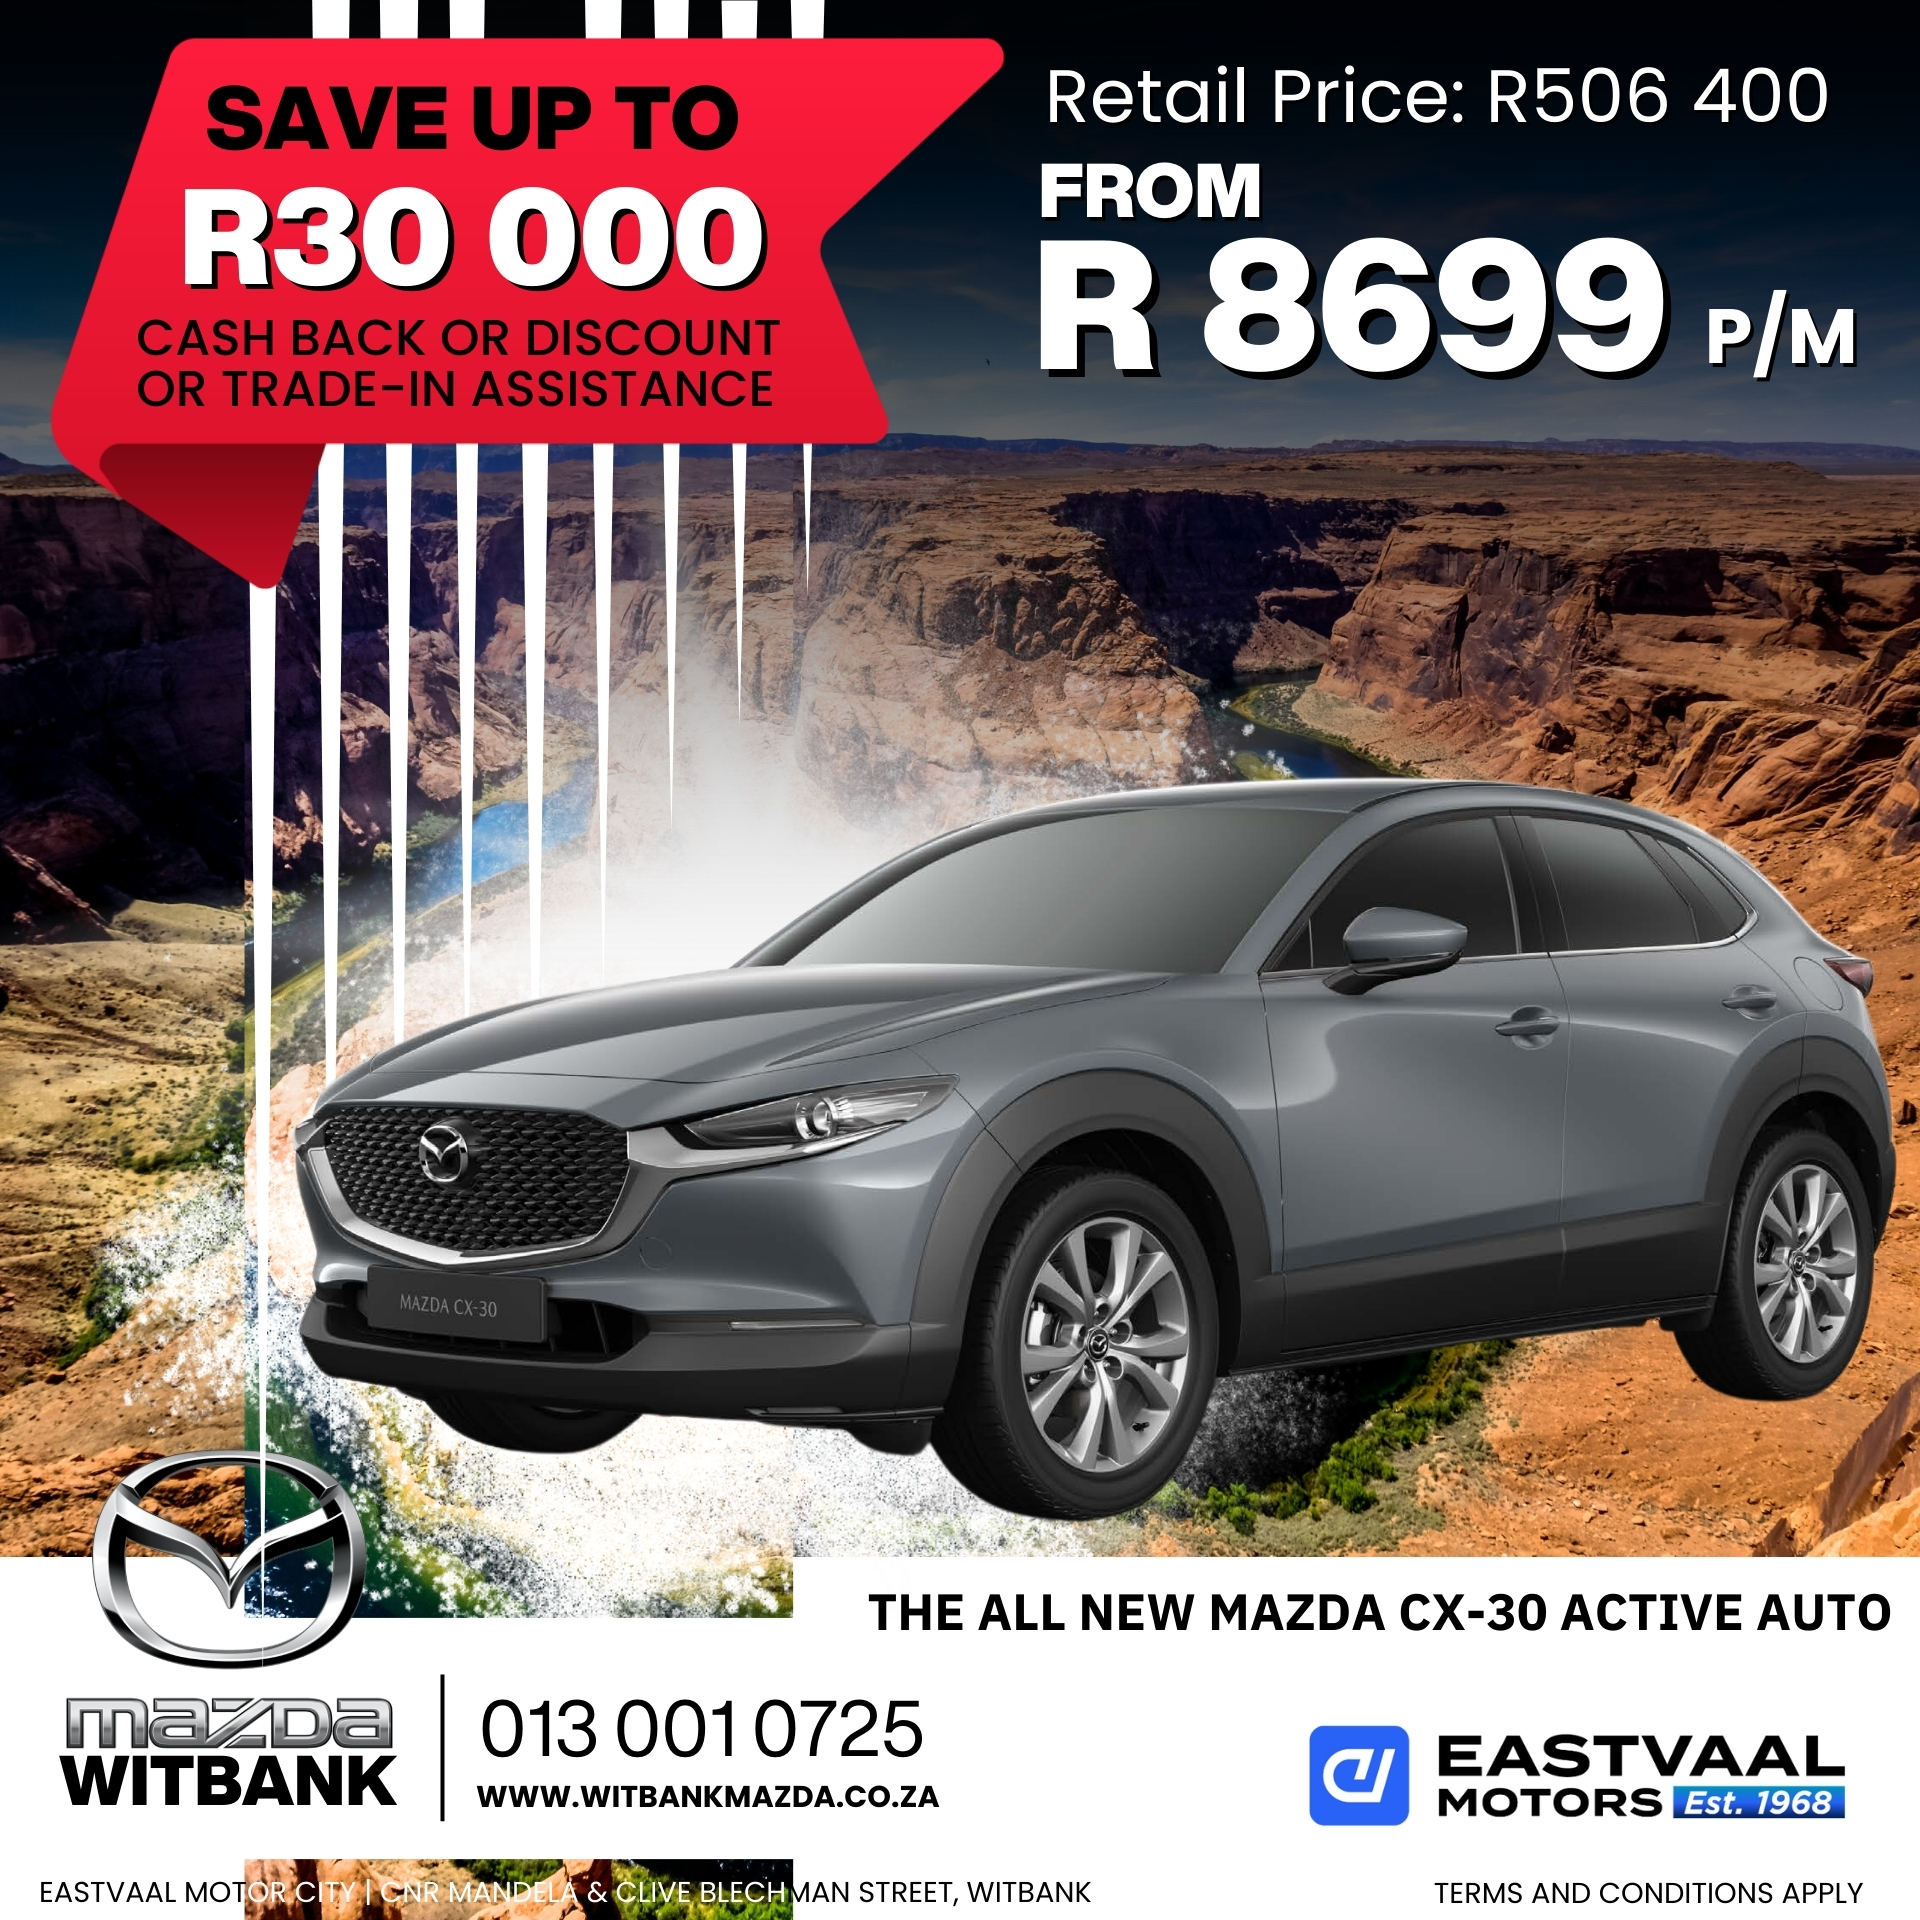 July is the perfect month to upgrade your ride! Discover exclusive Mazda offers at Eastvaal Motor City. image from 